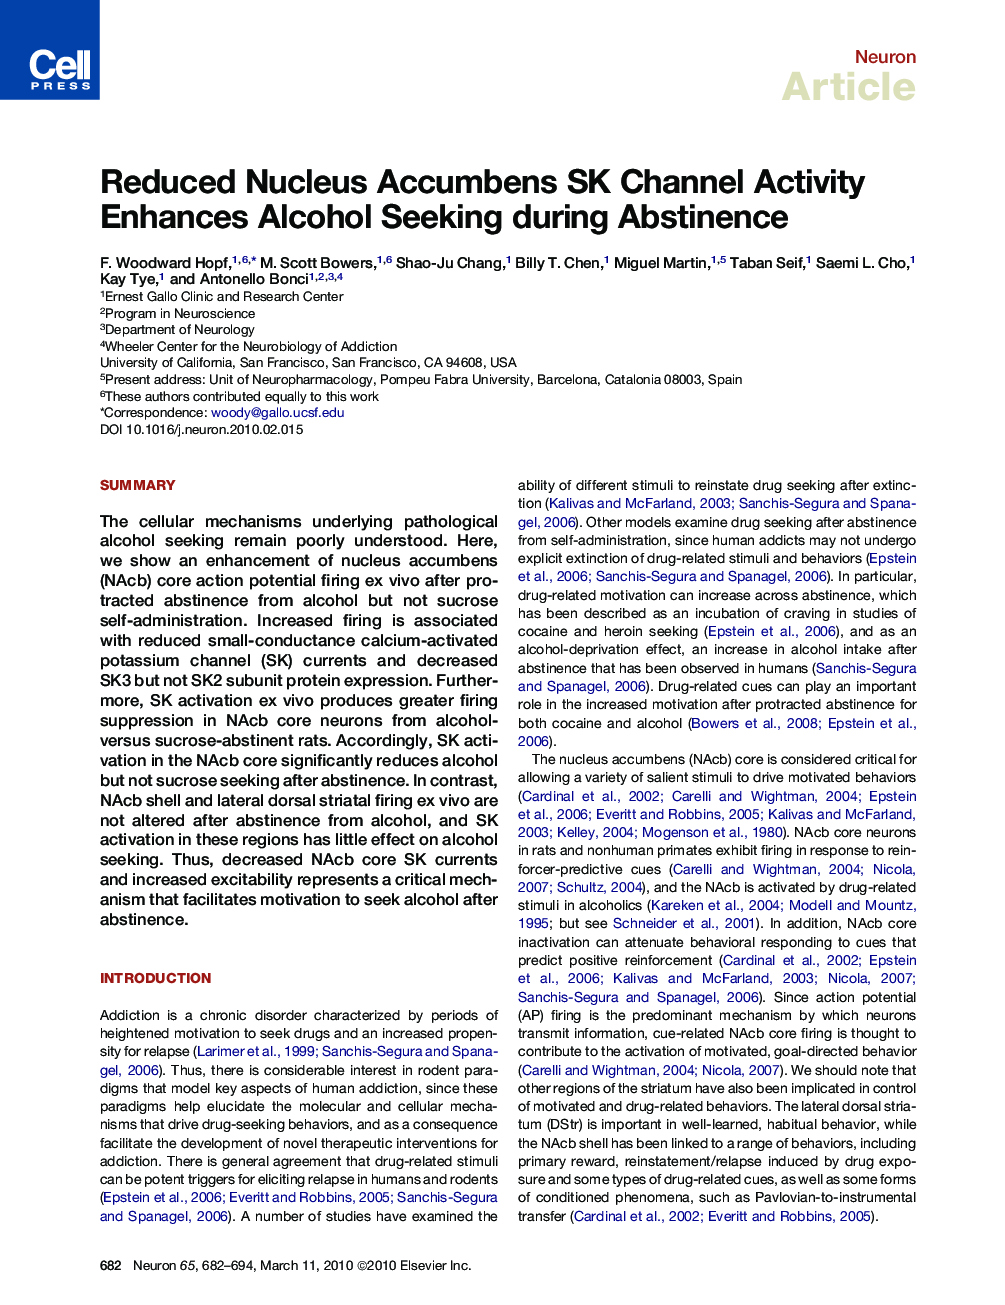 Reduced Nucleus Accumbens SK Channel Activity Enhances Alcohol Seeking during Abstinence